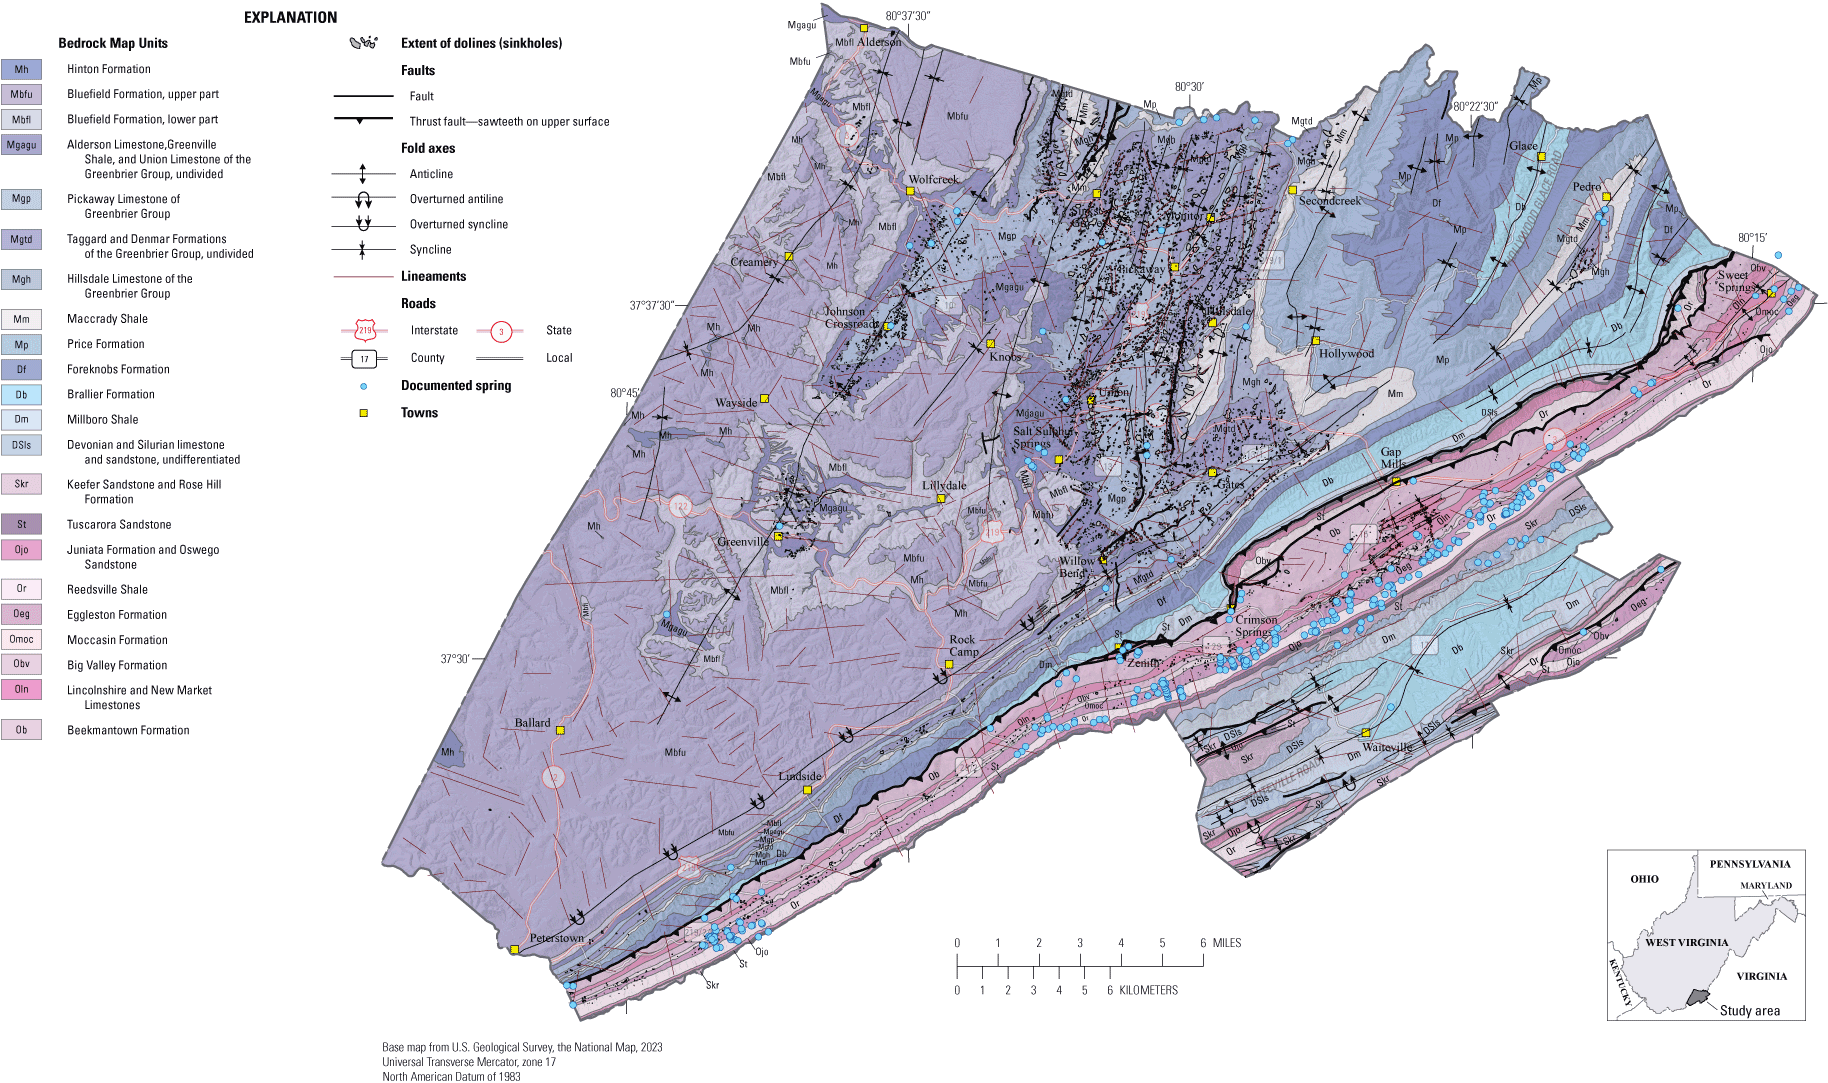 Bluefield Formation is dominant to the west, sinkholes are clustered in the north,
                        faults run to the northeast with springs east of the faults.